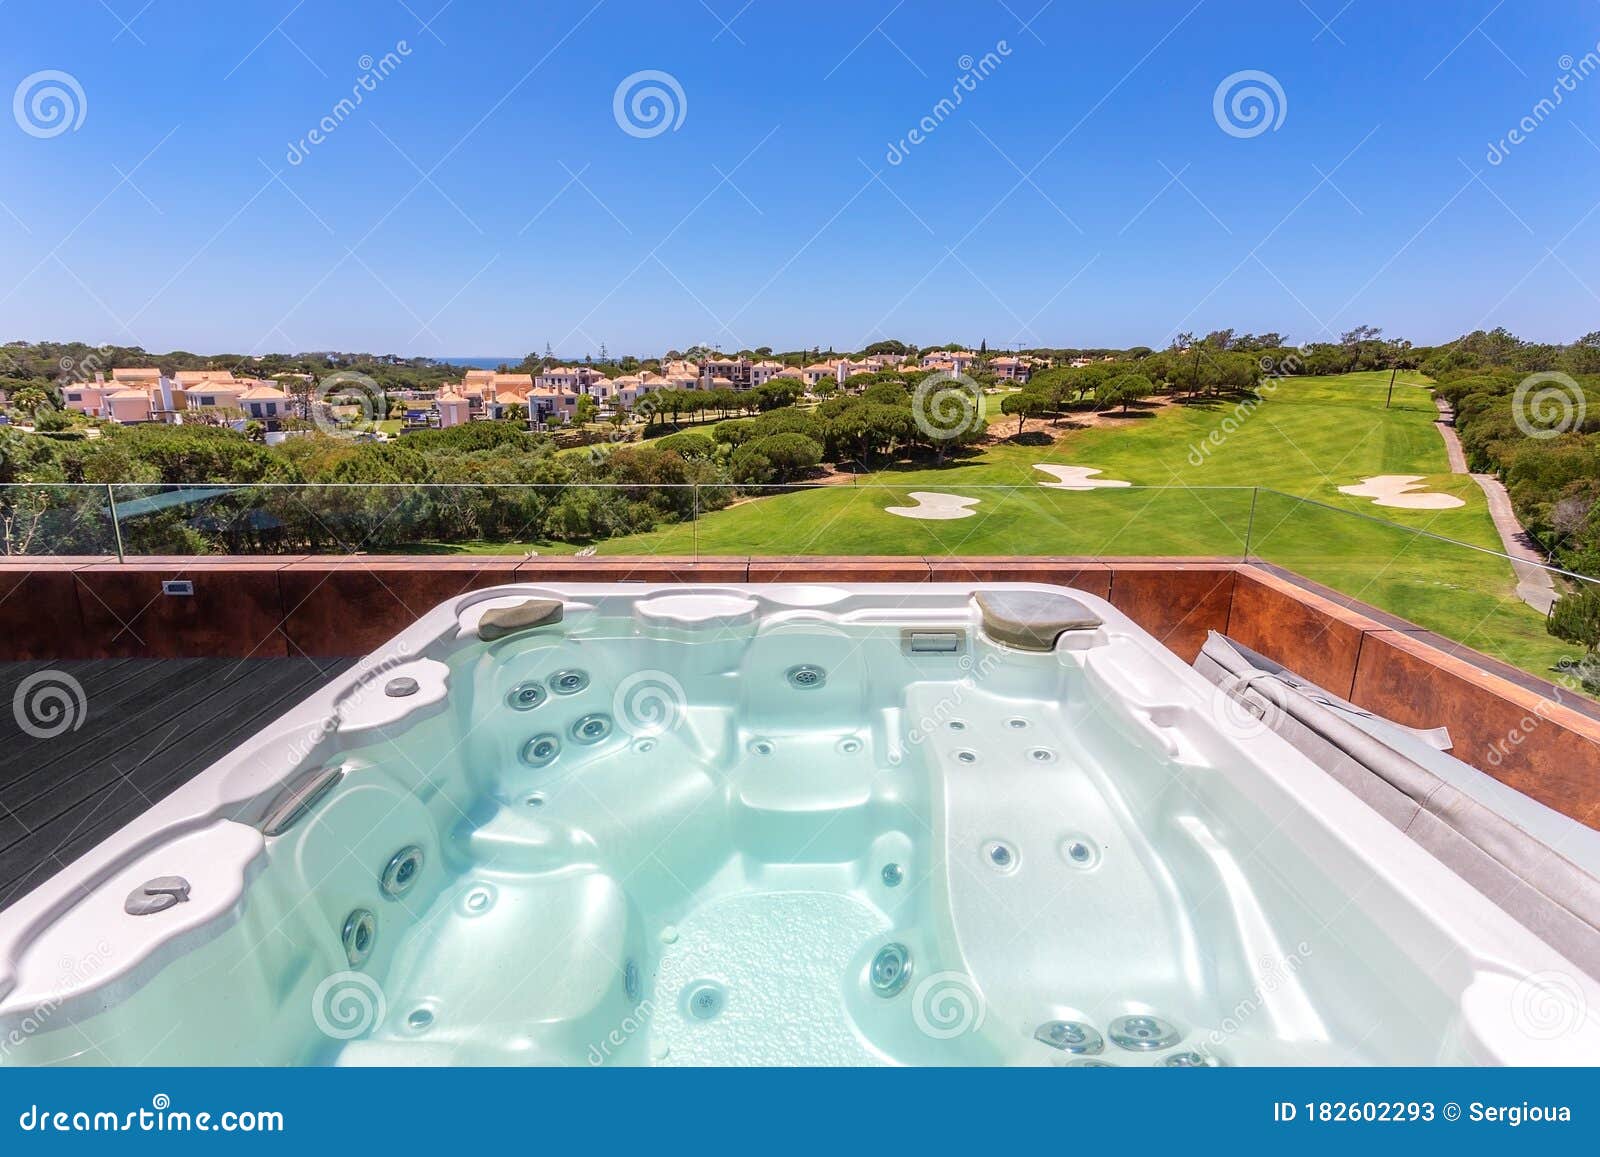 Modern Luxurious Pool Jacuzzi With Hydromassage With Beautiful Views And Greenery For